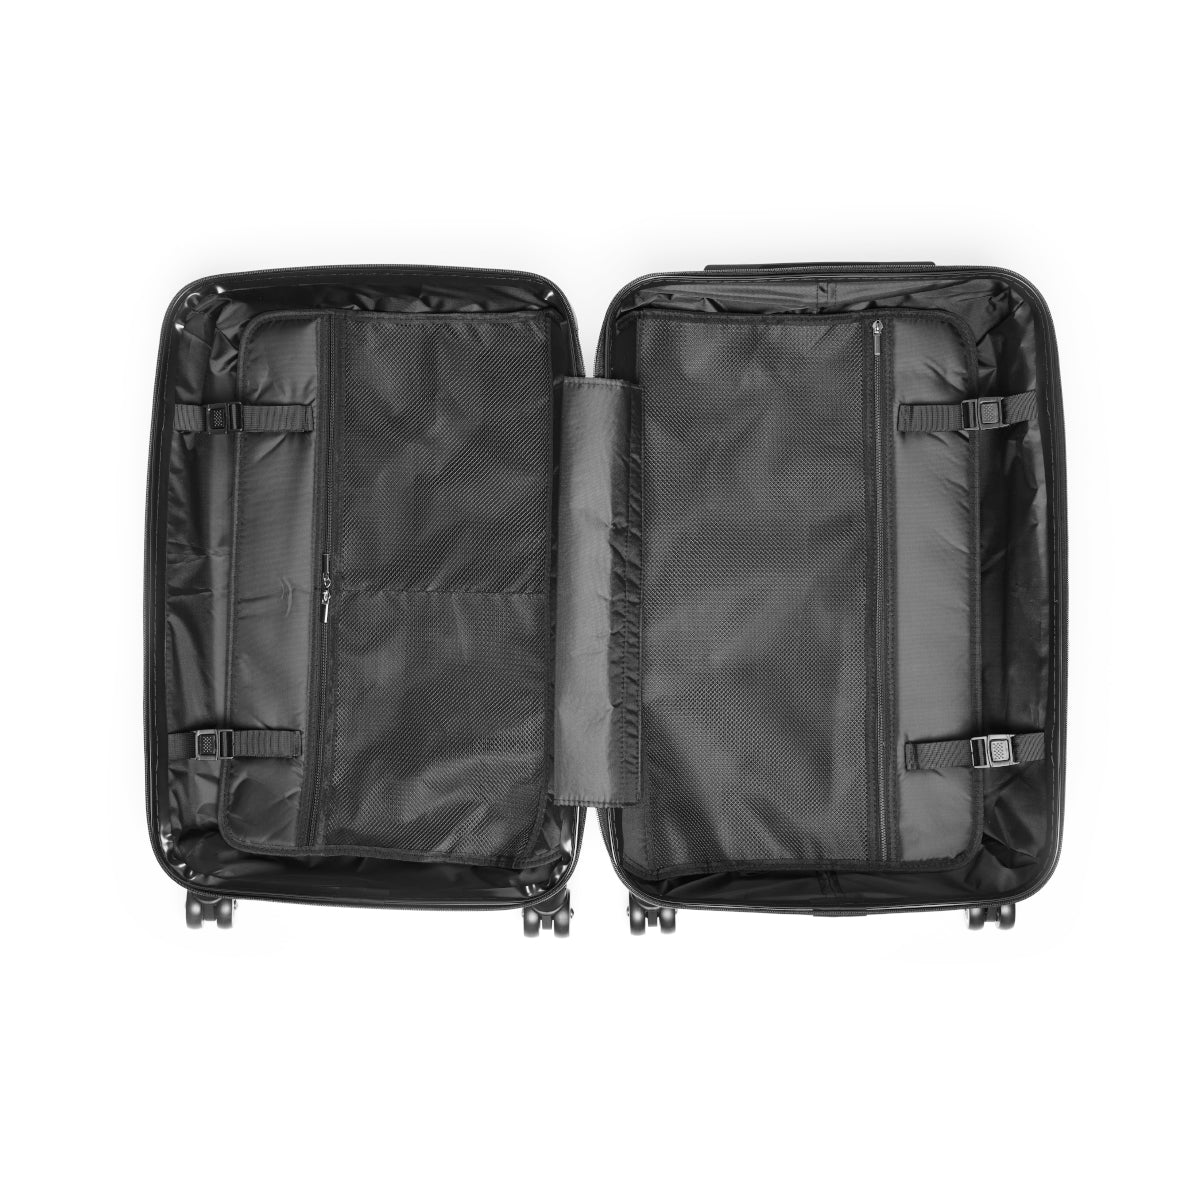 Getrott Coney Island Beach Aquarium Luna Park Governor Black Cabin Suitcase Inner Pockets Extended Storage Adjustable Telescopic Handle Inner Pockets Double wheeled Polycarbonate Hard-shell Built-in Lock